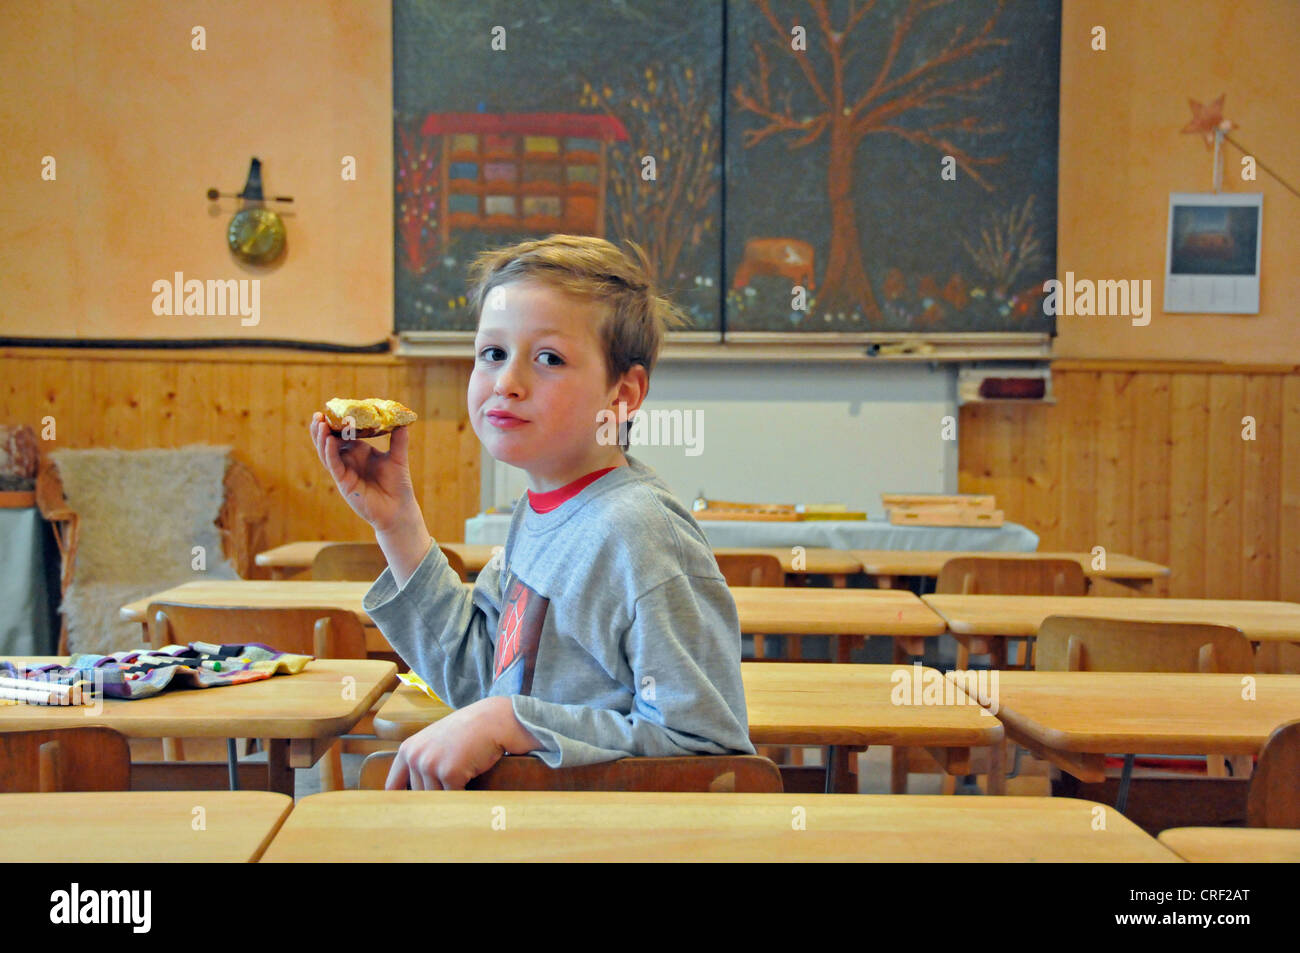 eight years old schoolboy with sandwich Stock Photo